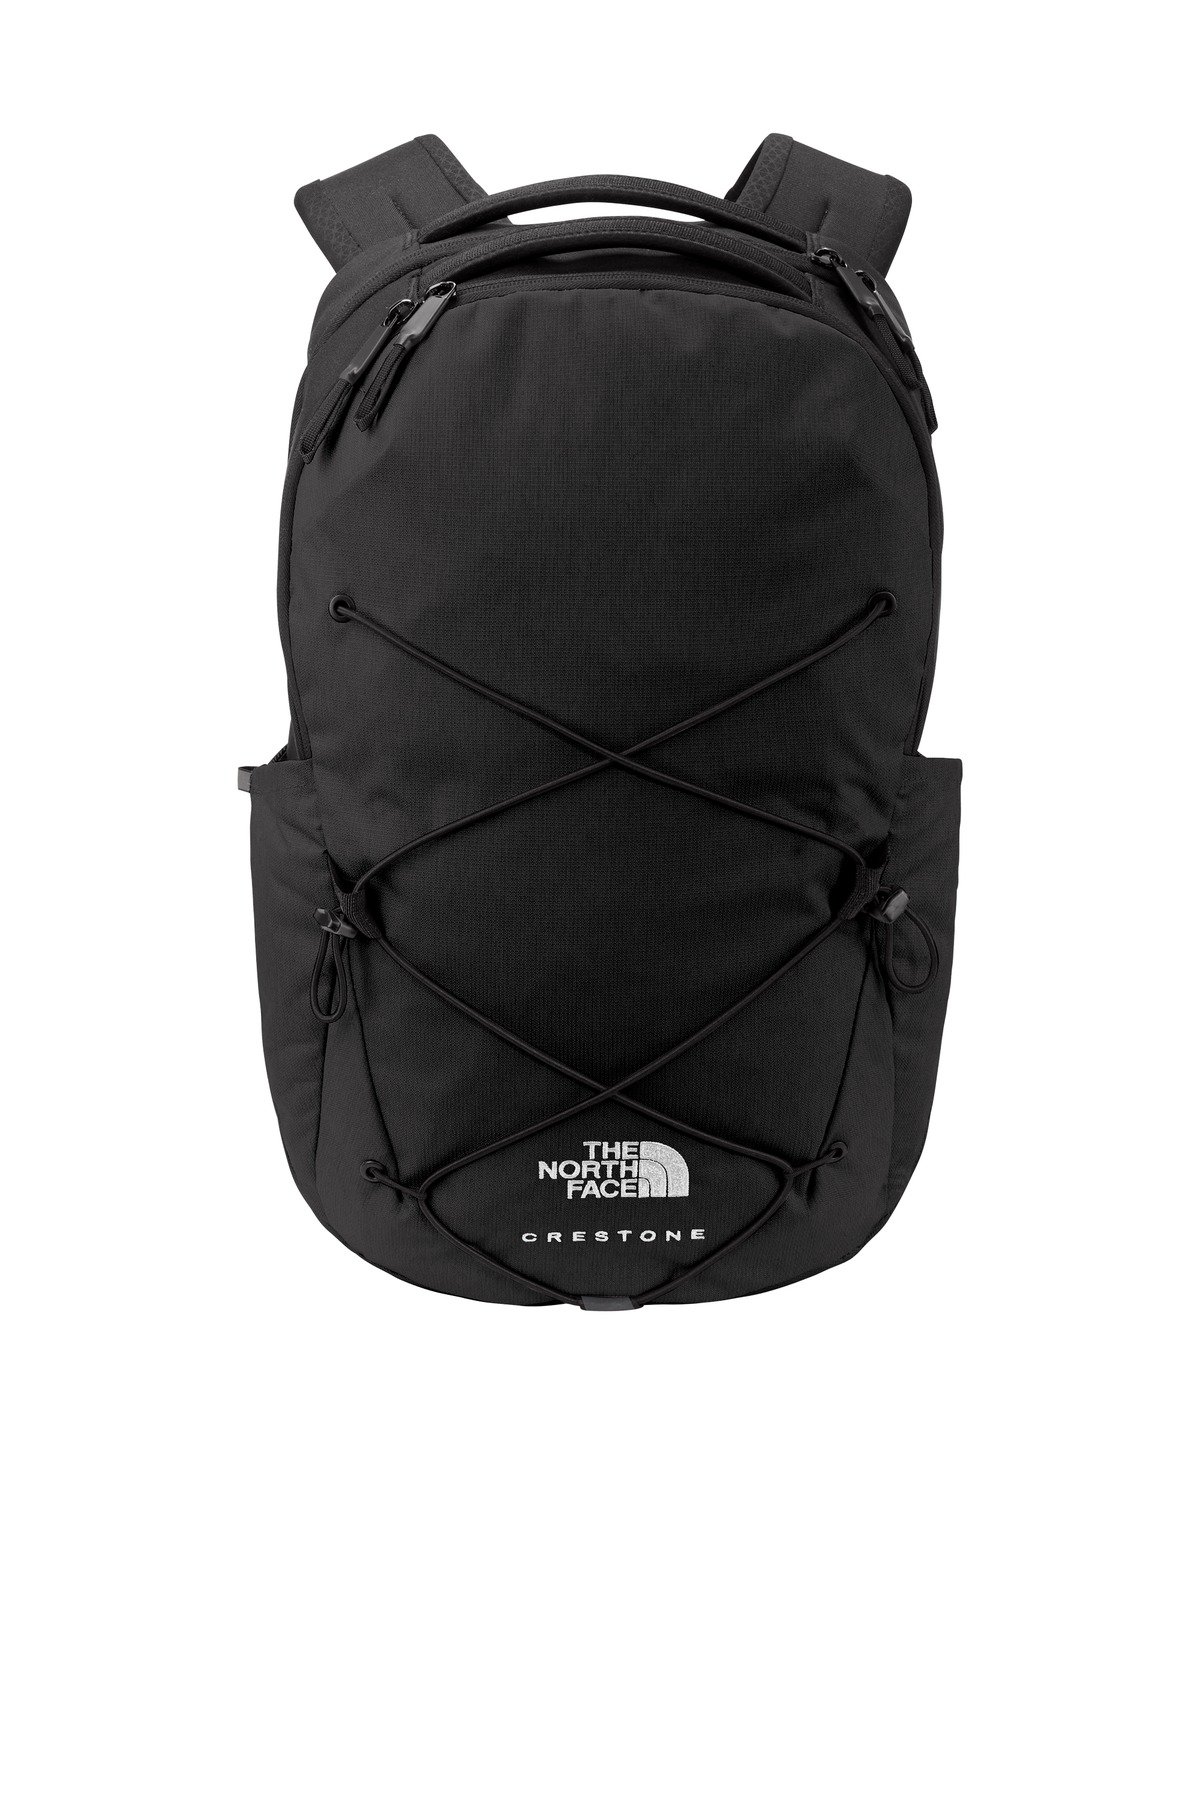 The North Face ® Crestone Backpack. NF0A52S8 - Custom Shirt Shop